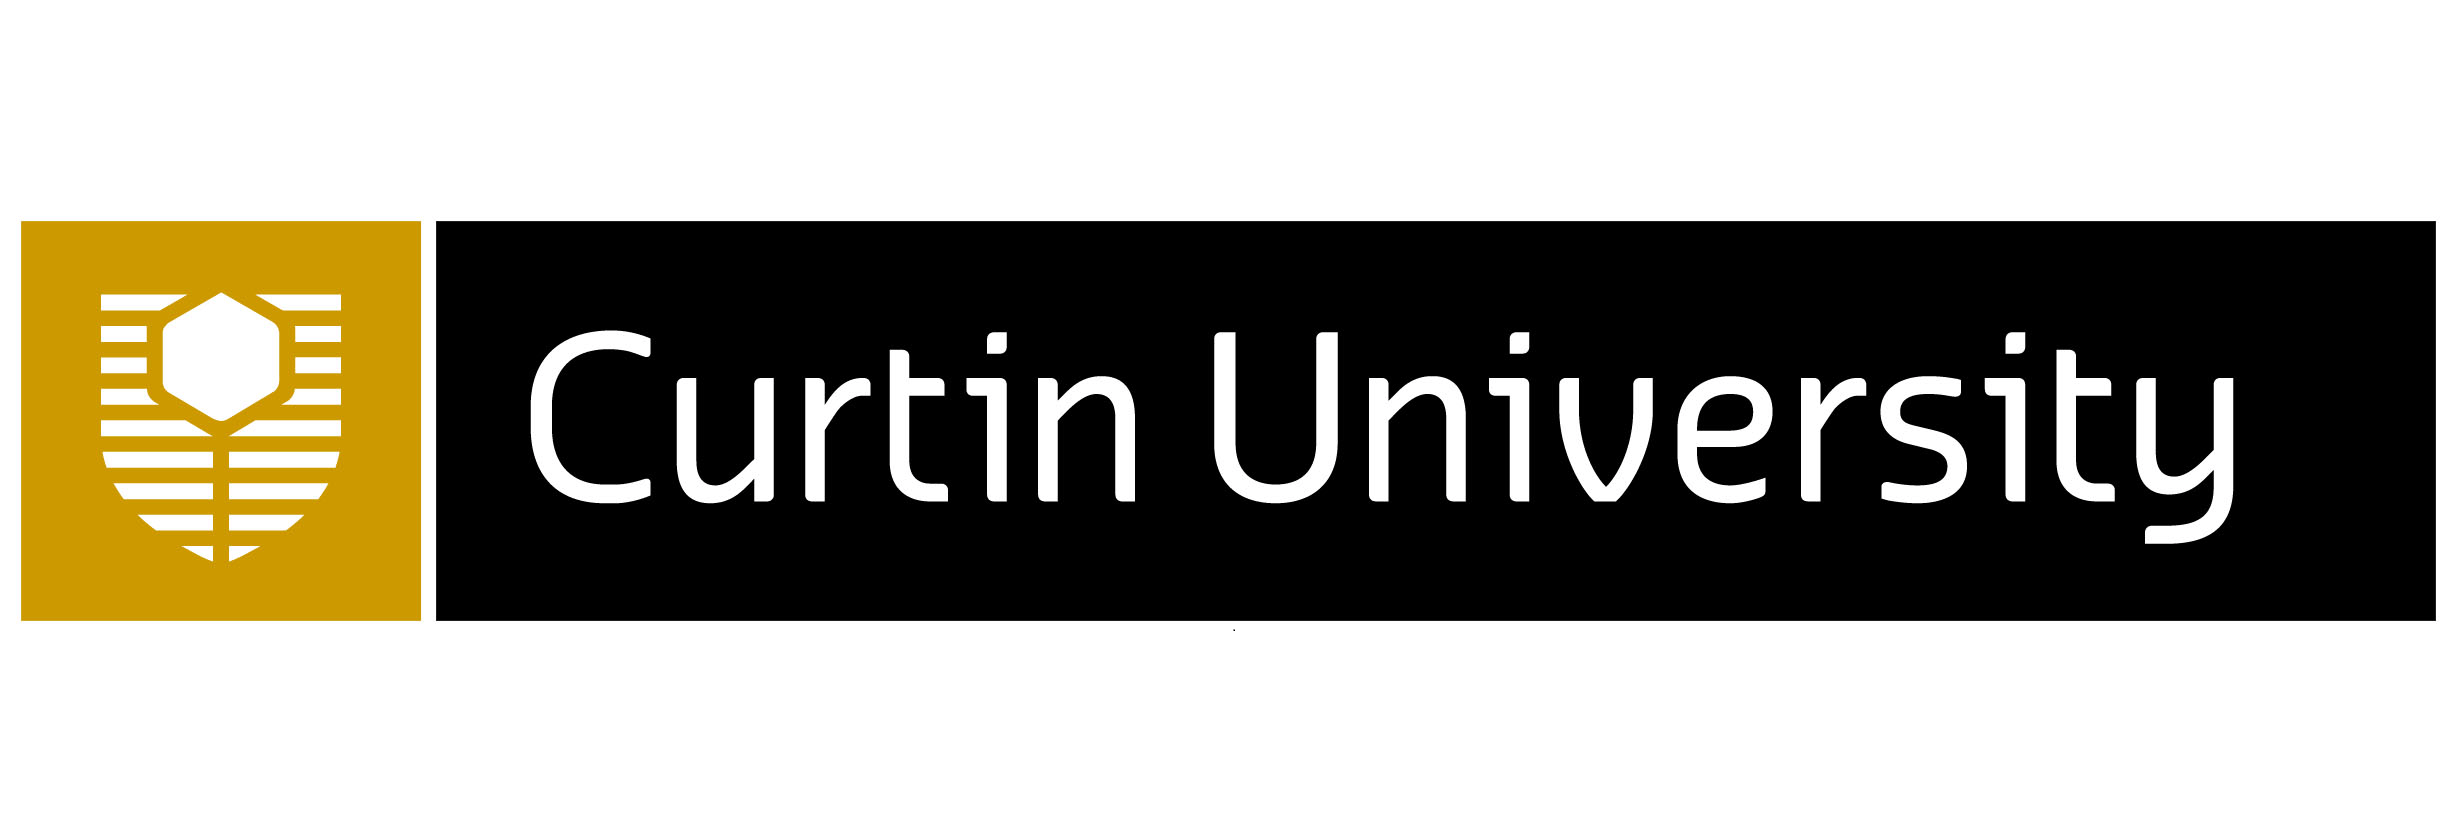 Bachelor of Science (Physiotherapy) | Bachelor's degree | Health & Well-Being | On Campus | 3 to 5 years | Curtin University | Australia